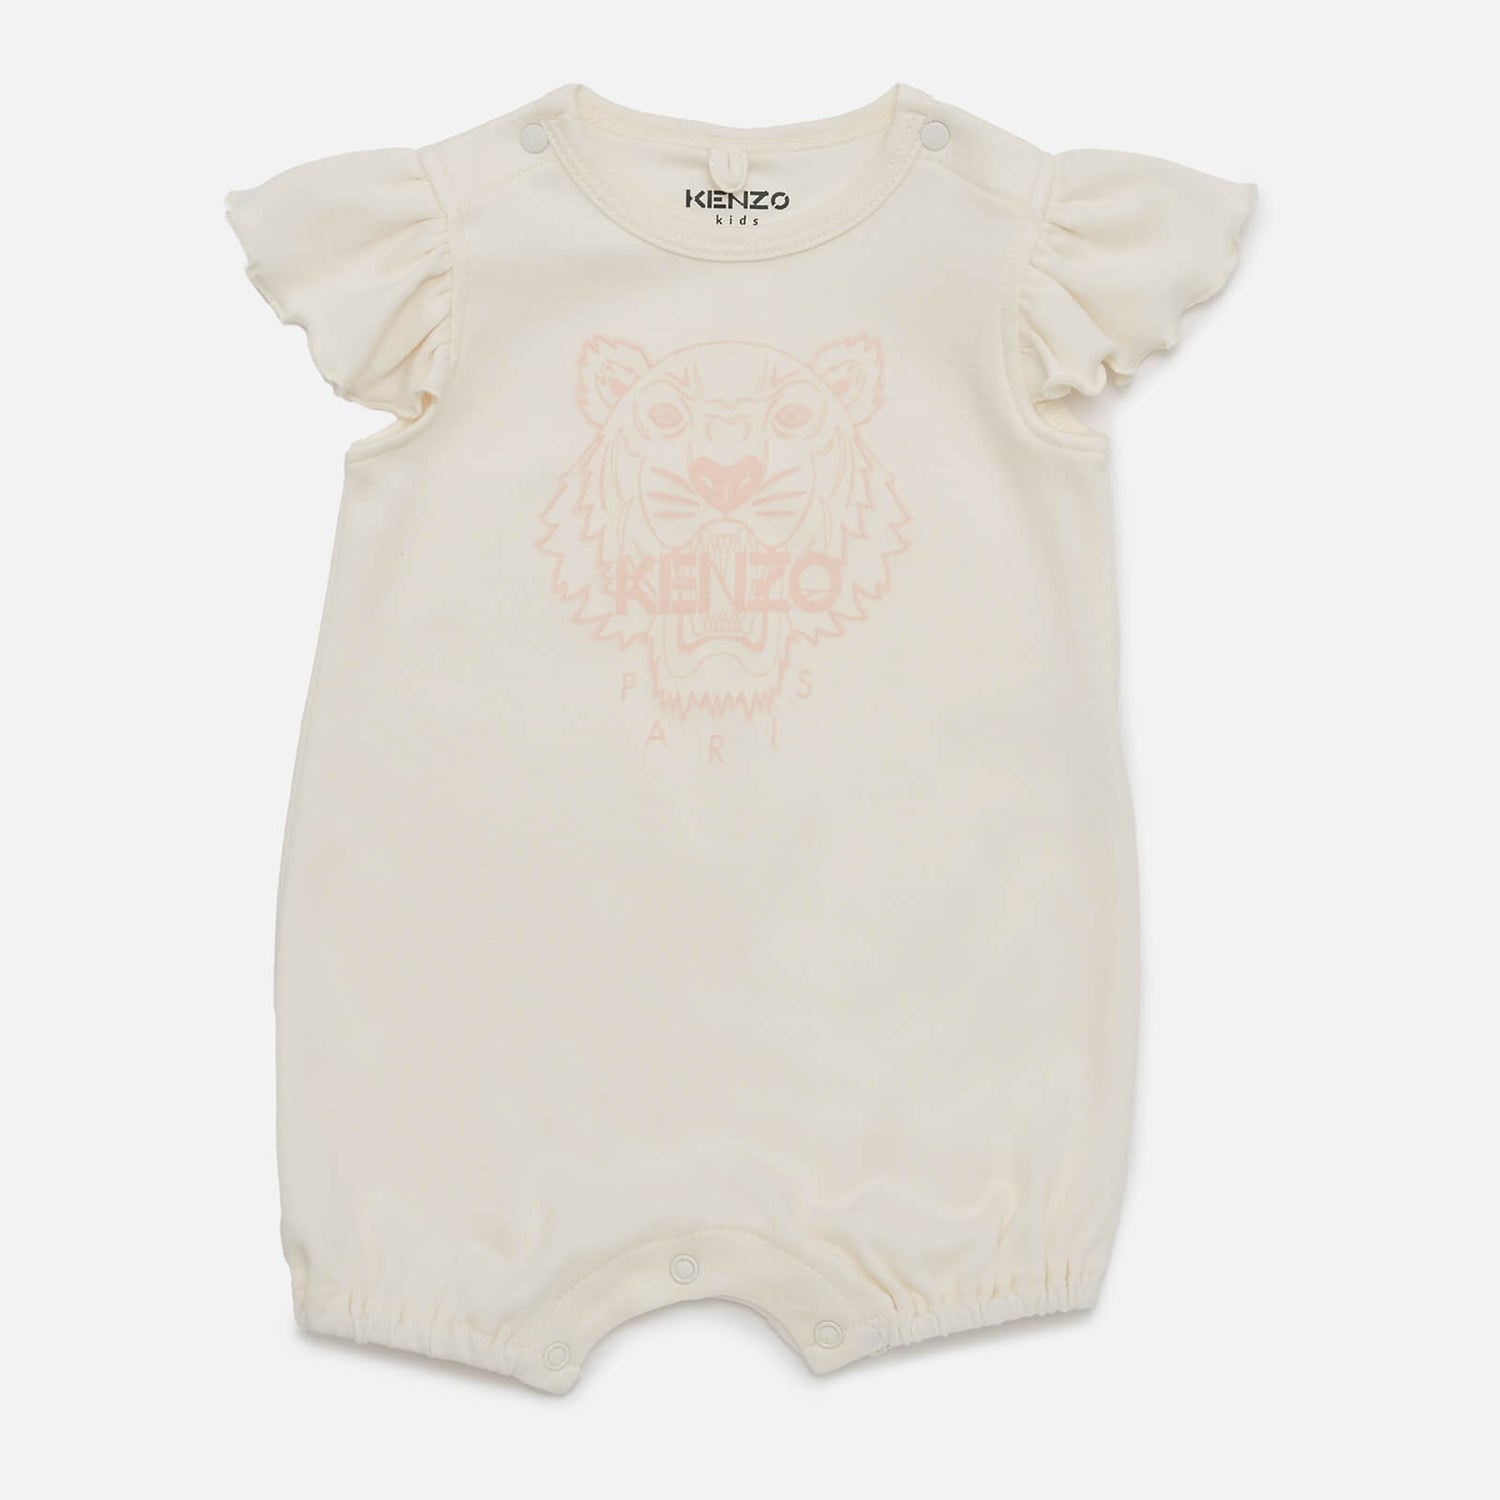 KENZO Babys' Romper Suit - Off White - 3 Months